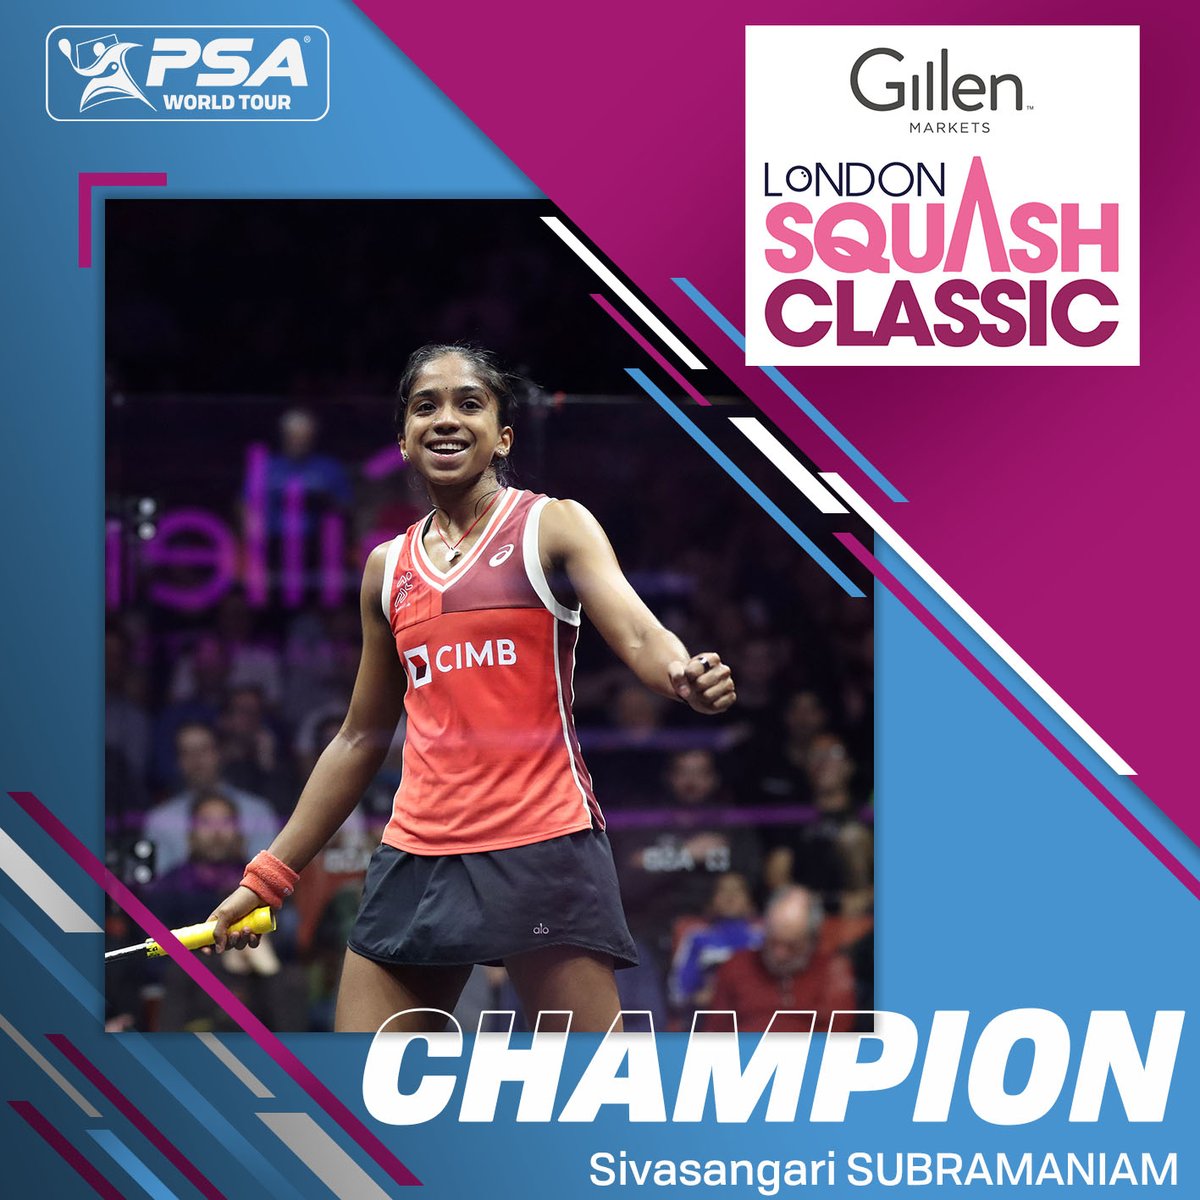 A first Gold event title for @sangari_99 🏆 She's beaten the World No.1, World No.4 and World No.2 to lift the trophy 🔥 🇲🇾 [7] @sangari_99 beats [2] @HaniaaElHammamy 🇪🇬 3-2: 11-9, 5-11, 13-11, 12-14, 11-8 (81m) 📝 Report here: bit.ly/3vGDoNO #LondonClassic